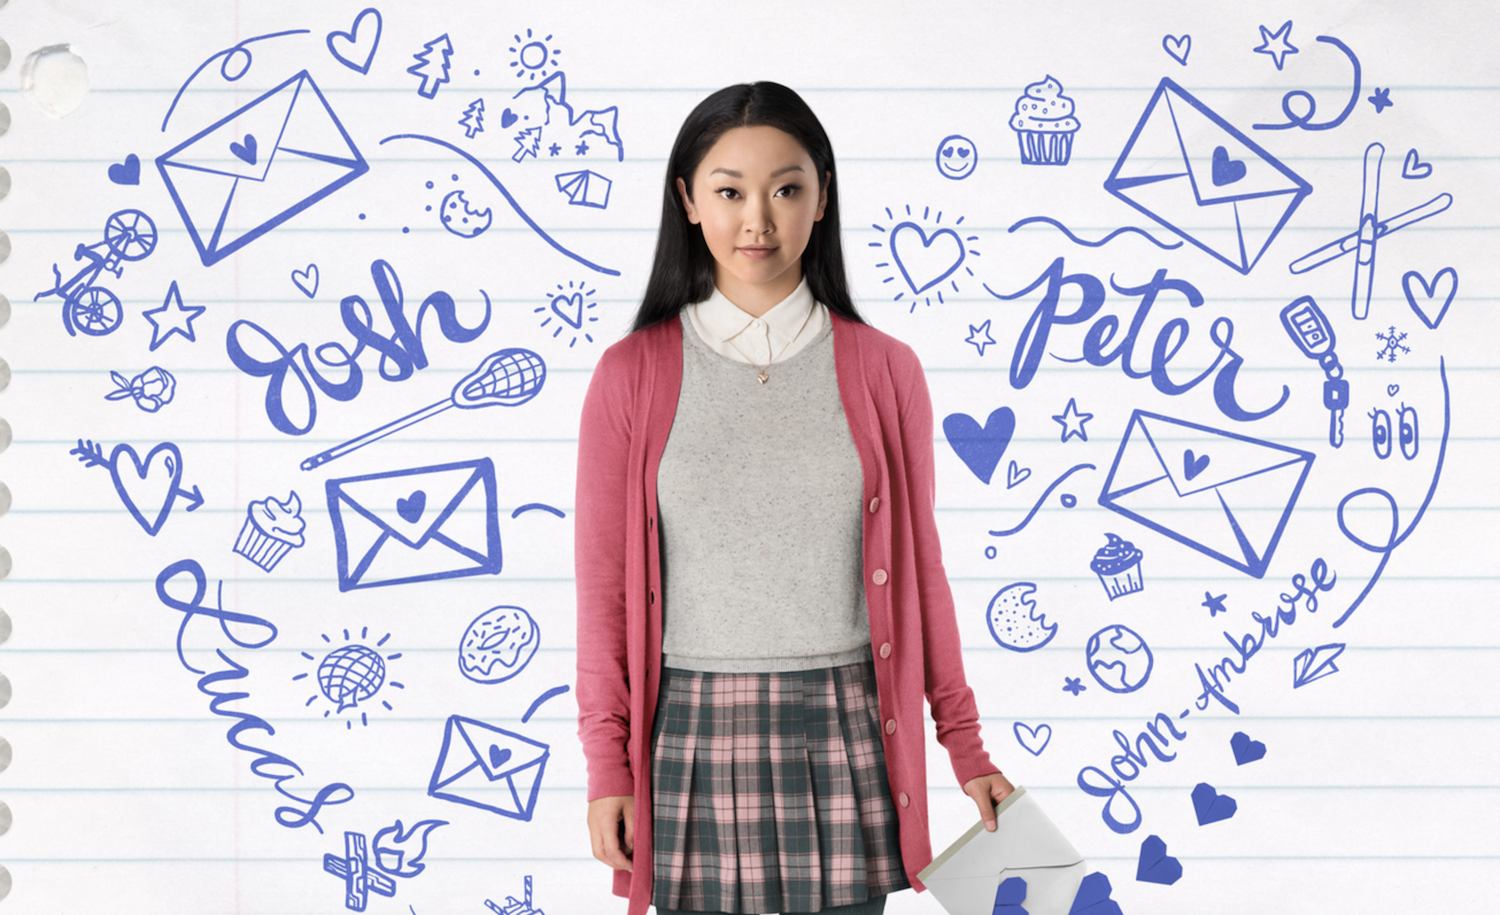 Lara Jean Covey from the poster of Netflix's 'To All the Boys I've Loved Before,' based on the YA novel by Jenny Han.